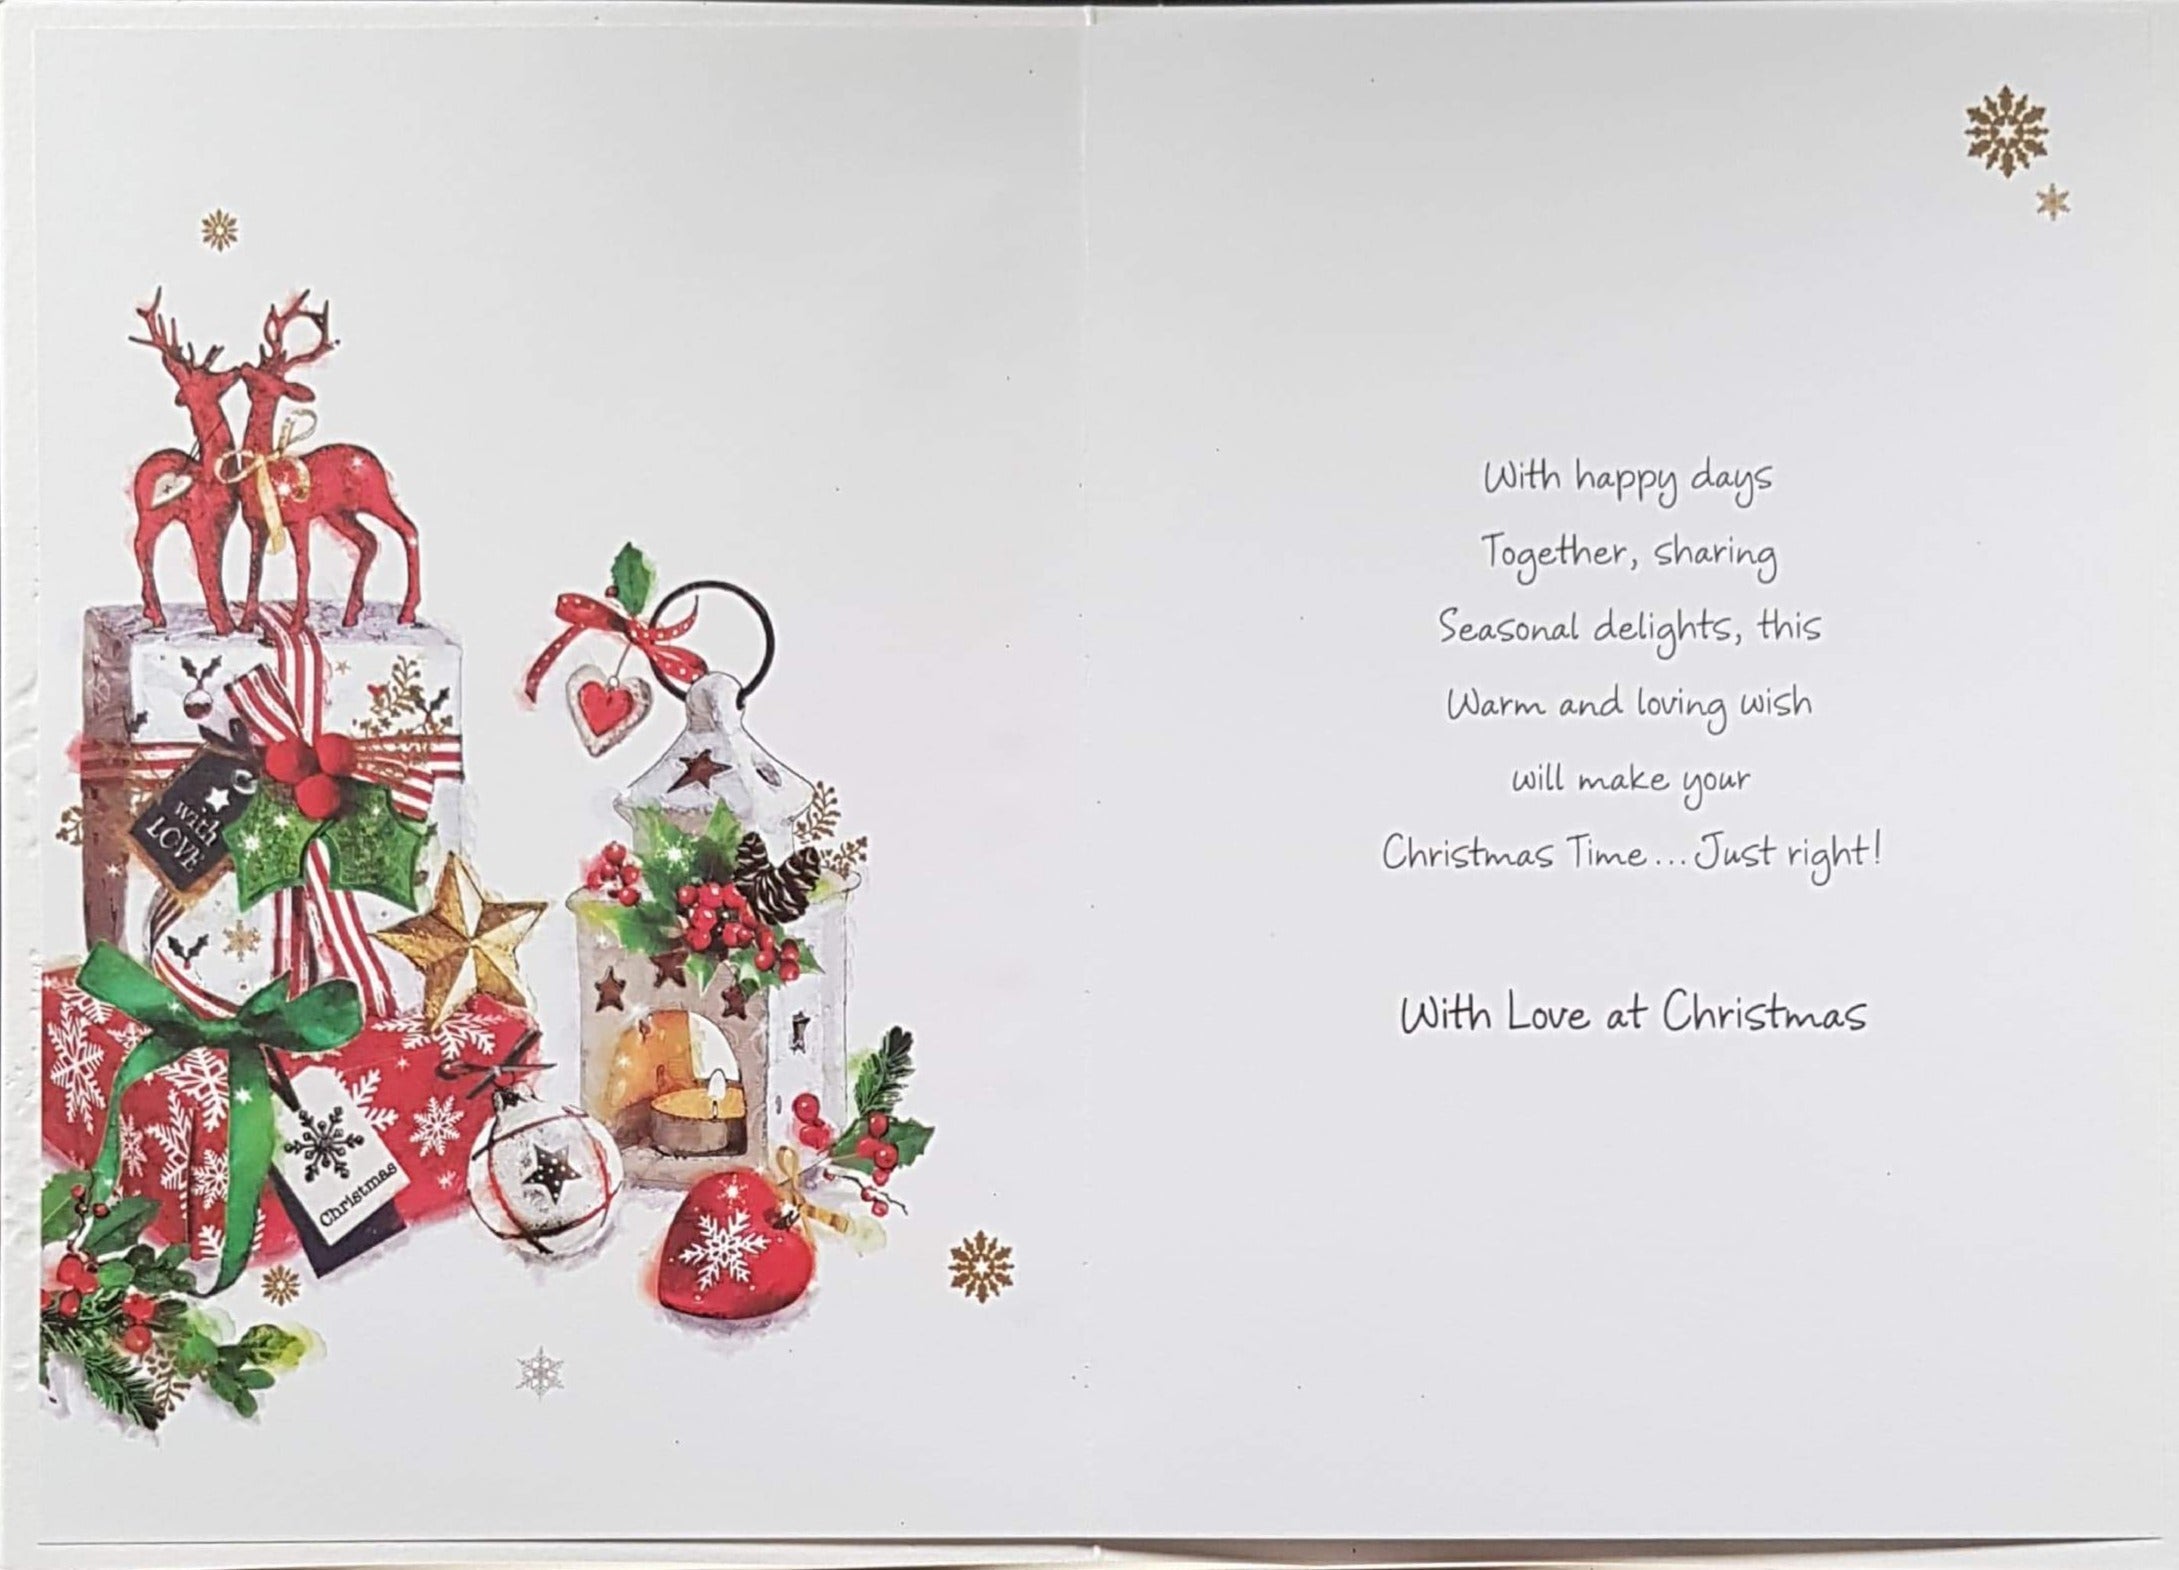 Daughter And Partner Christmas Card - At Christmas & Wrapped Gifts & Two Red Reindeer